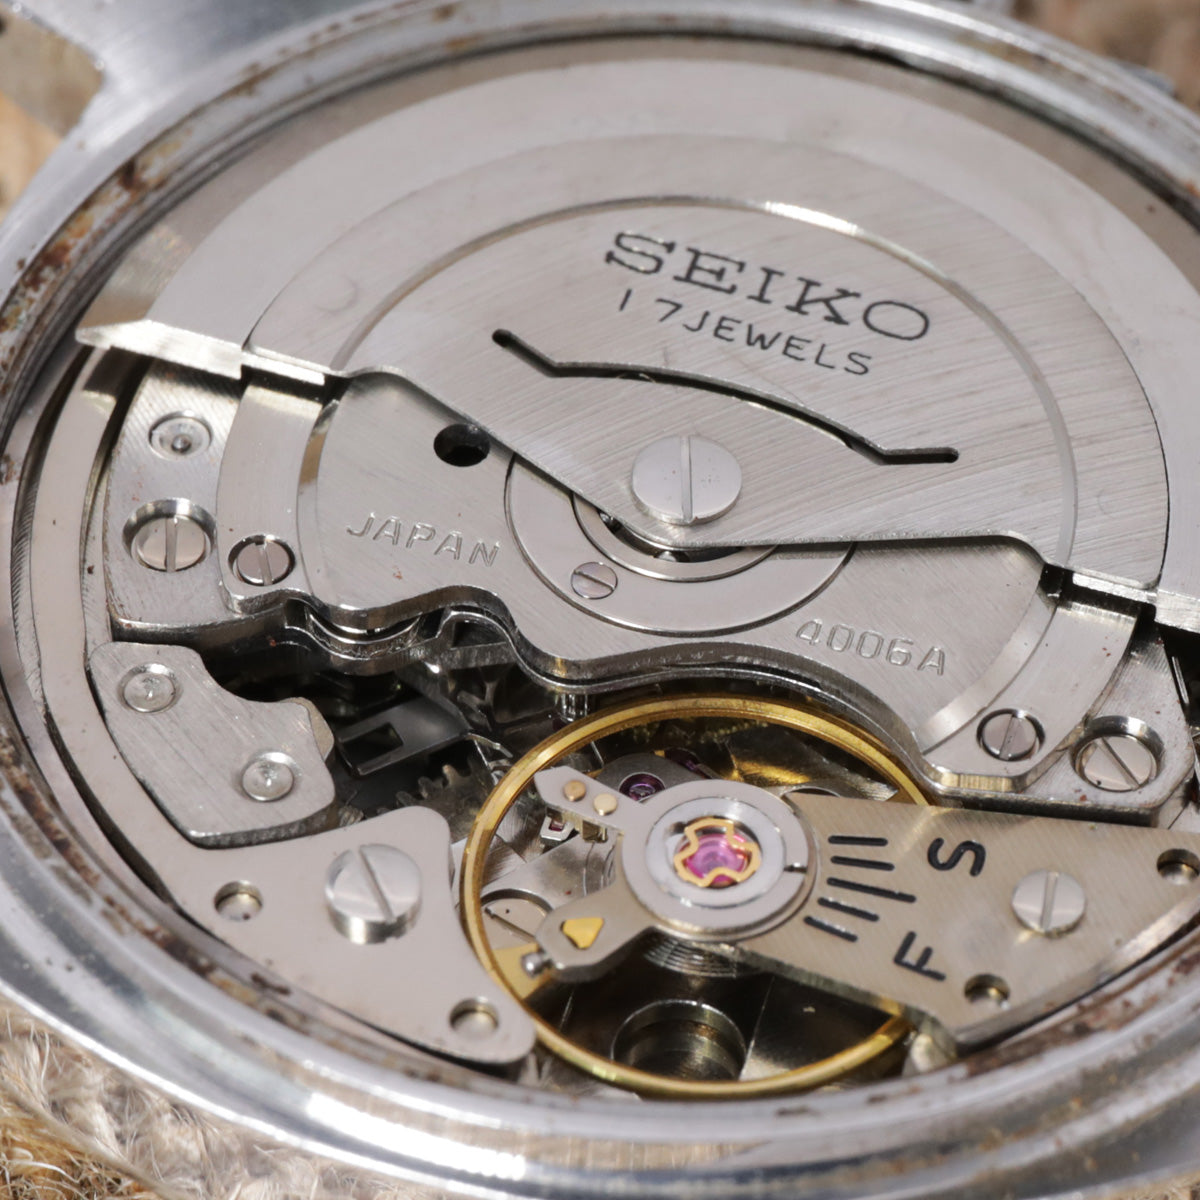 Seiko Bell-Matic, the Mechanical Watch that has an Alarm | Strapcode